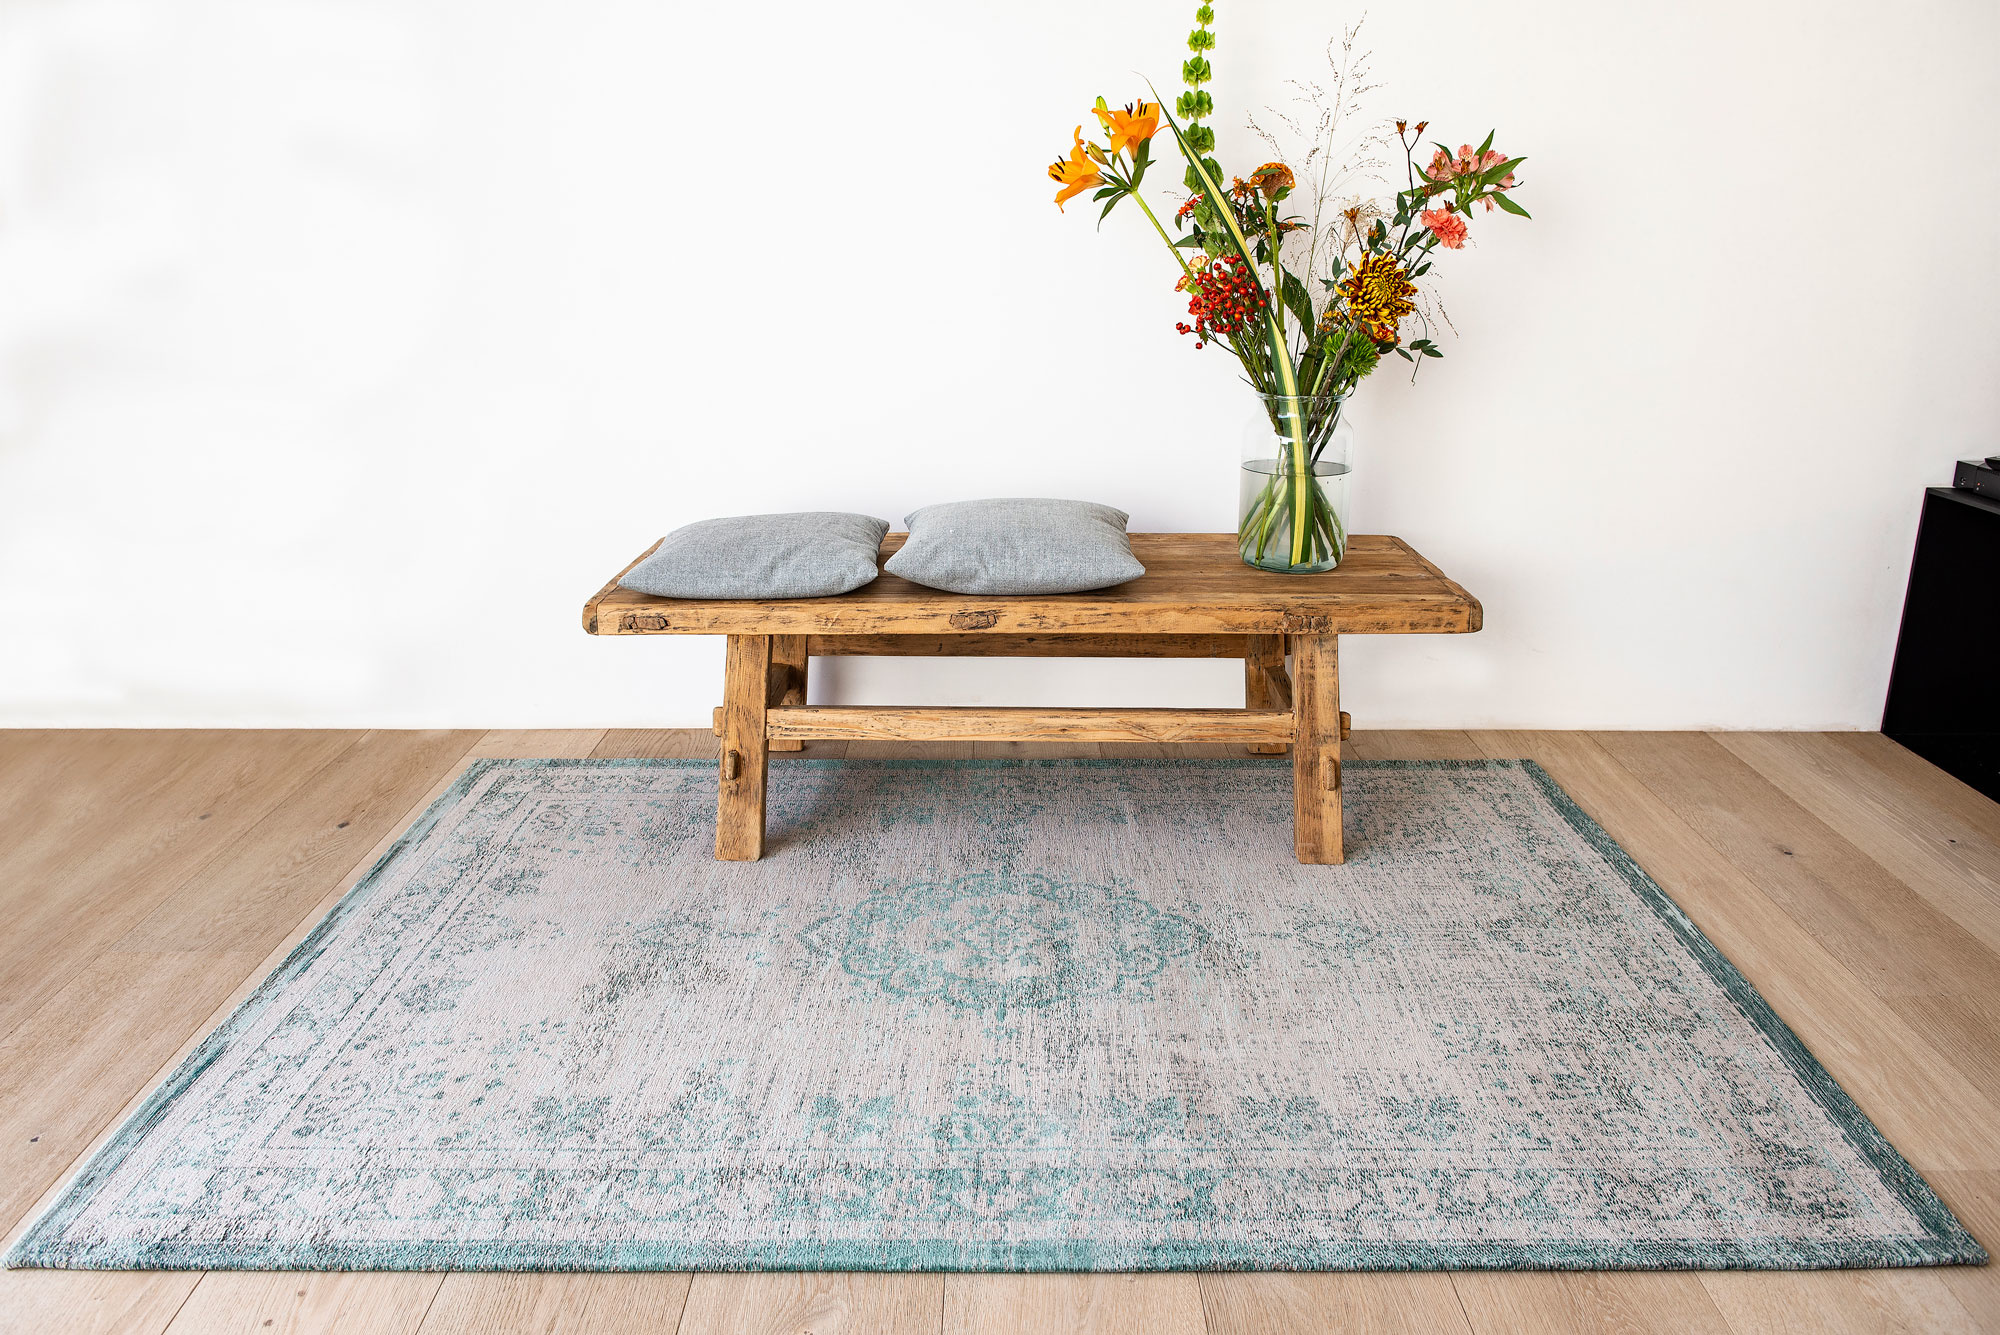 Medallion Turquoise Flatwoven Rug ☞ Size: 5' 7" x 8' (170 x 240 cm)